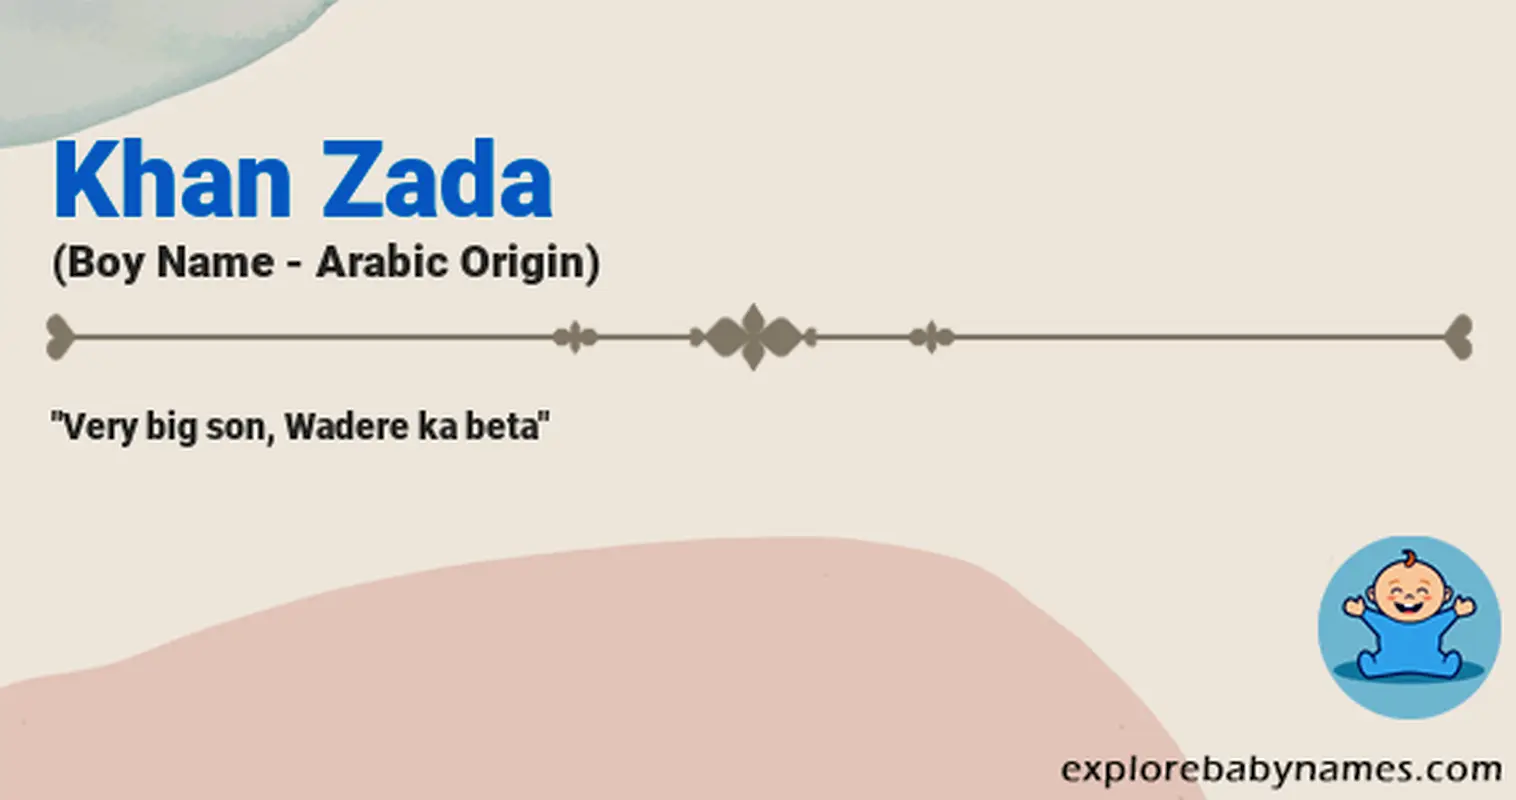 Meaning of Khan Zada